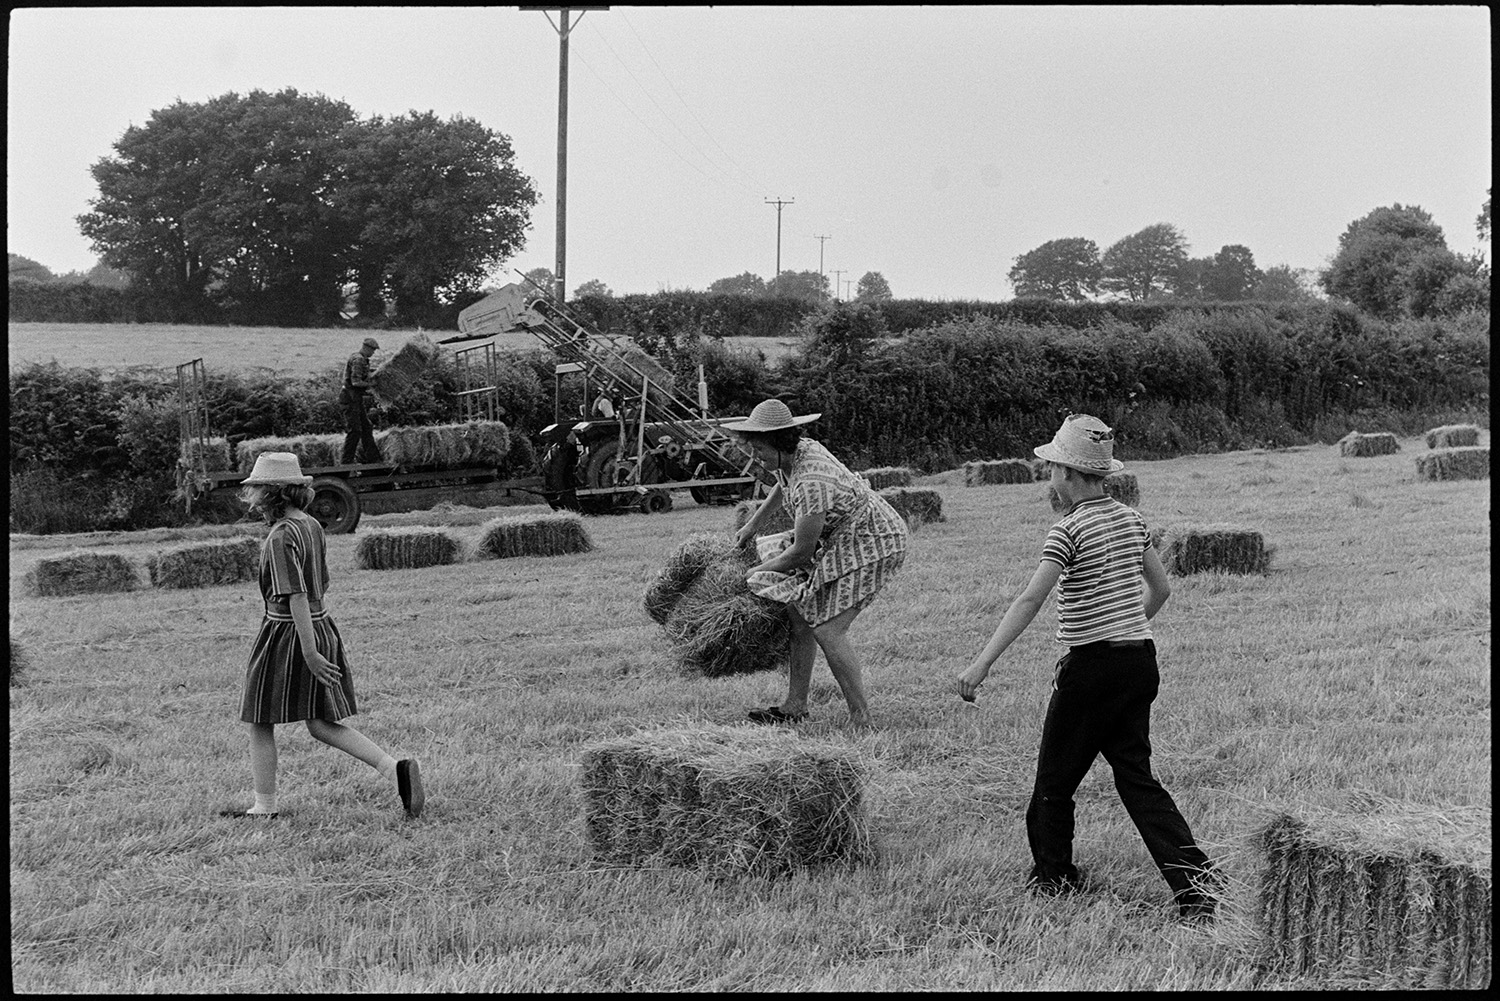 Woman, twin children haymaking. 
[Mrs Oke and her twin children moving hay bales in a field at Deckport, Hatherleigh. Mr Oke is loading the bales onto a tractor and trailer in the background, using an elevator. Mrs Oke is wearing a dress and straw hat.]